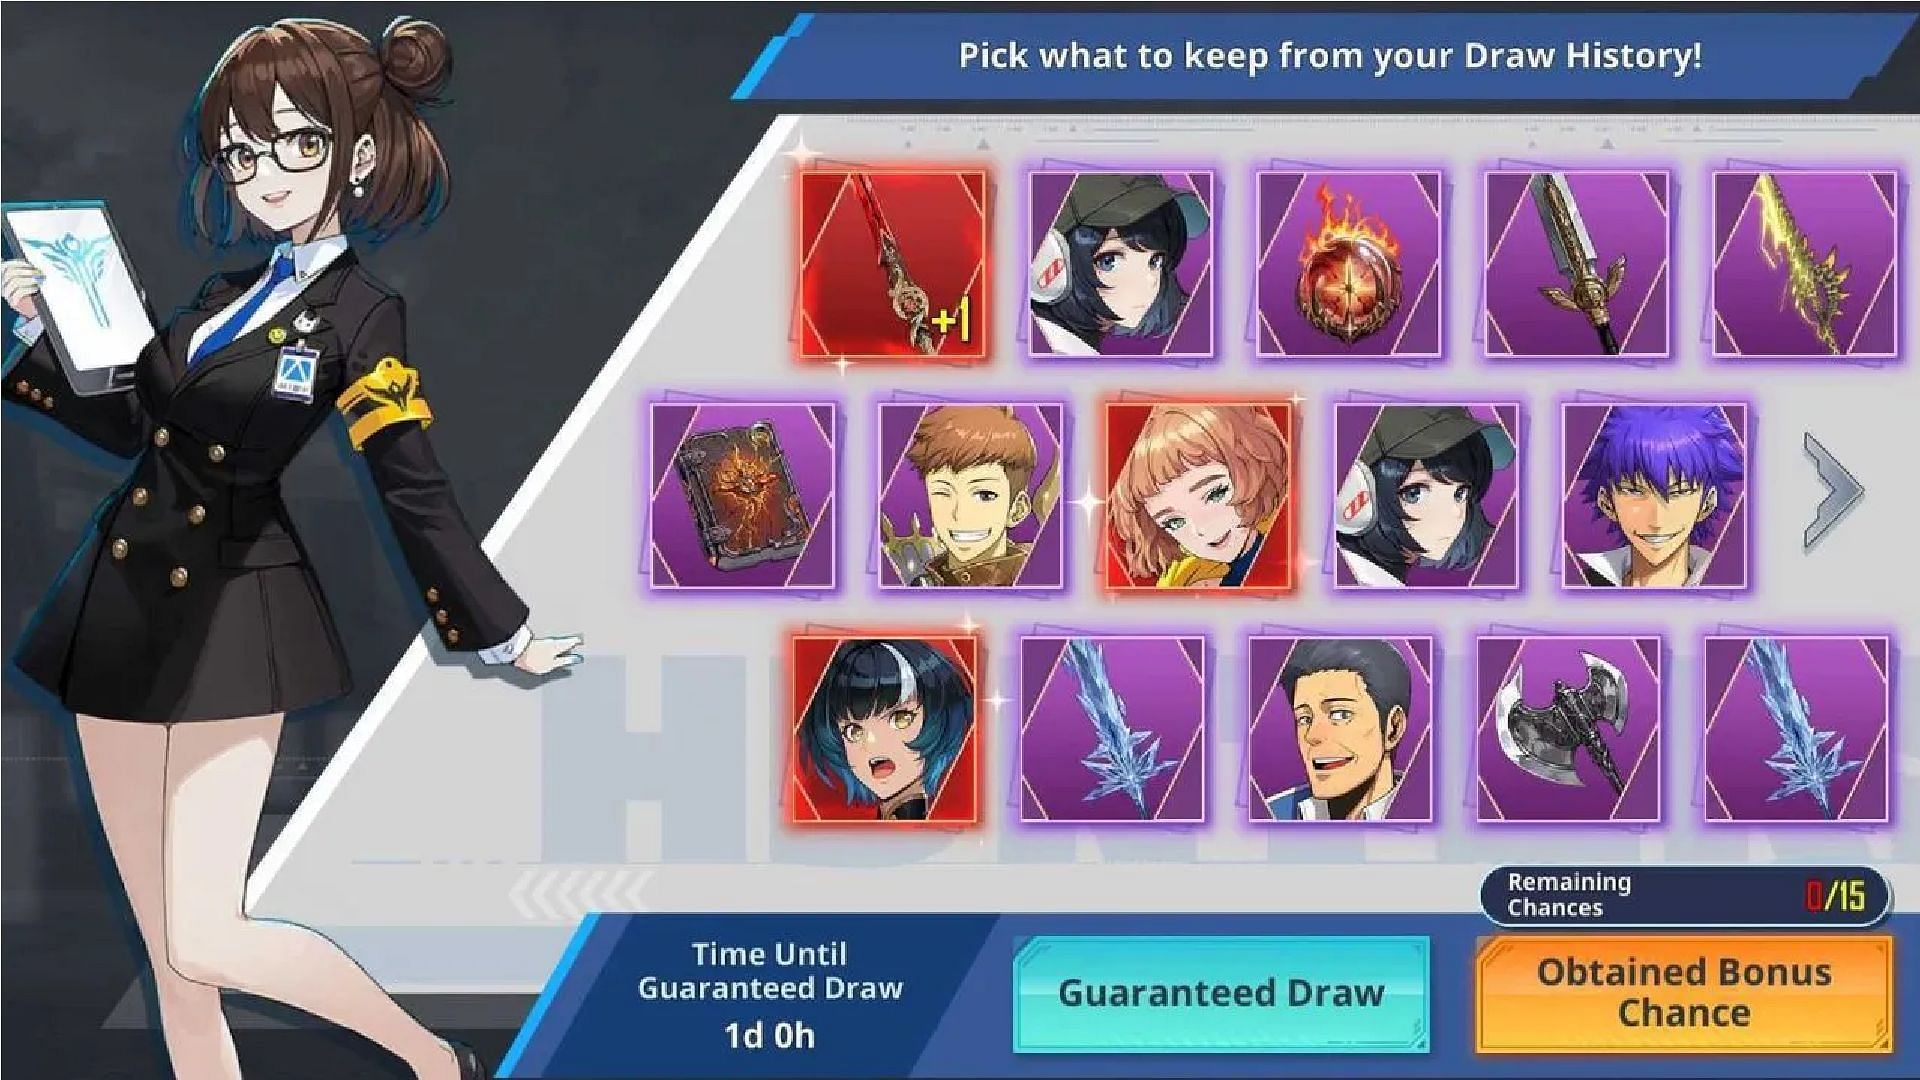 There is a two-day countdown (image does not reflect the beginning of it) within which you must complete all your draws to get the Guaranteed Draw (Image via Netmarble)